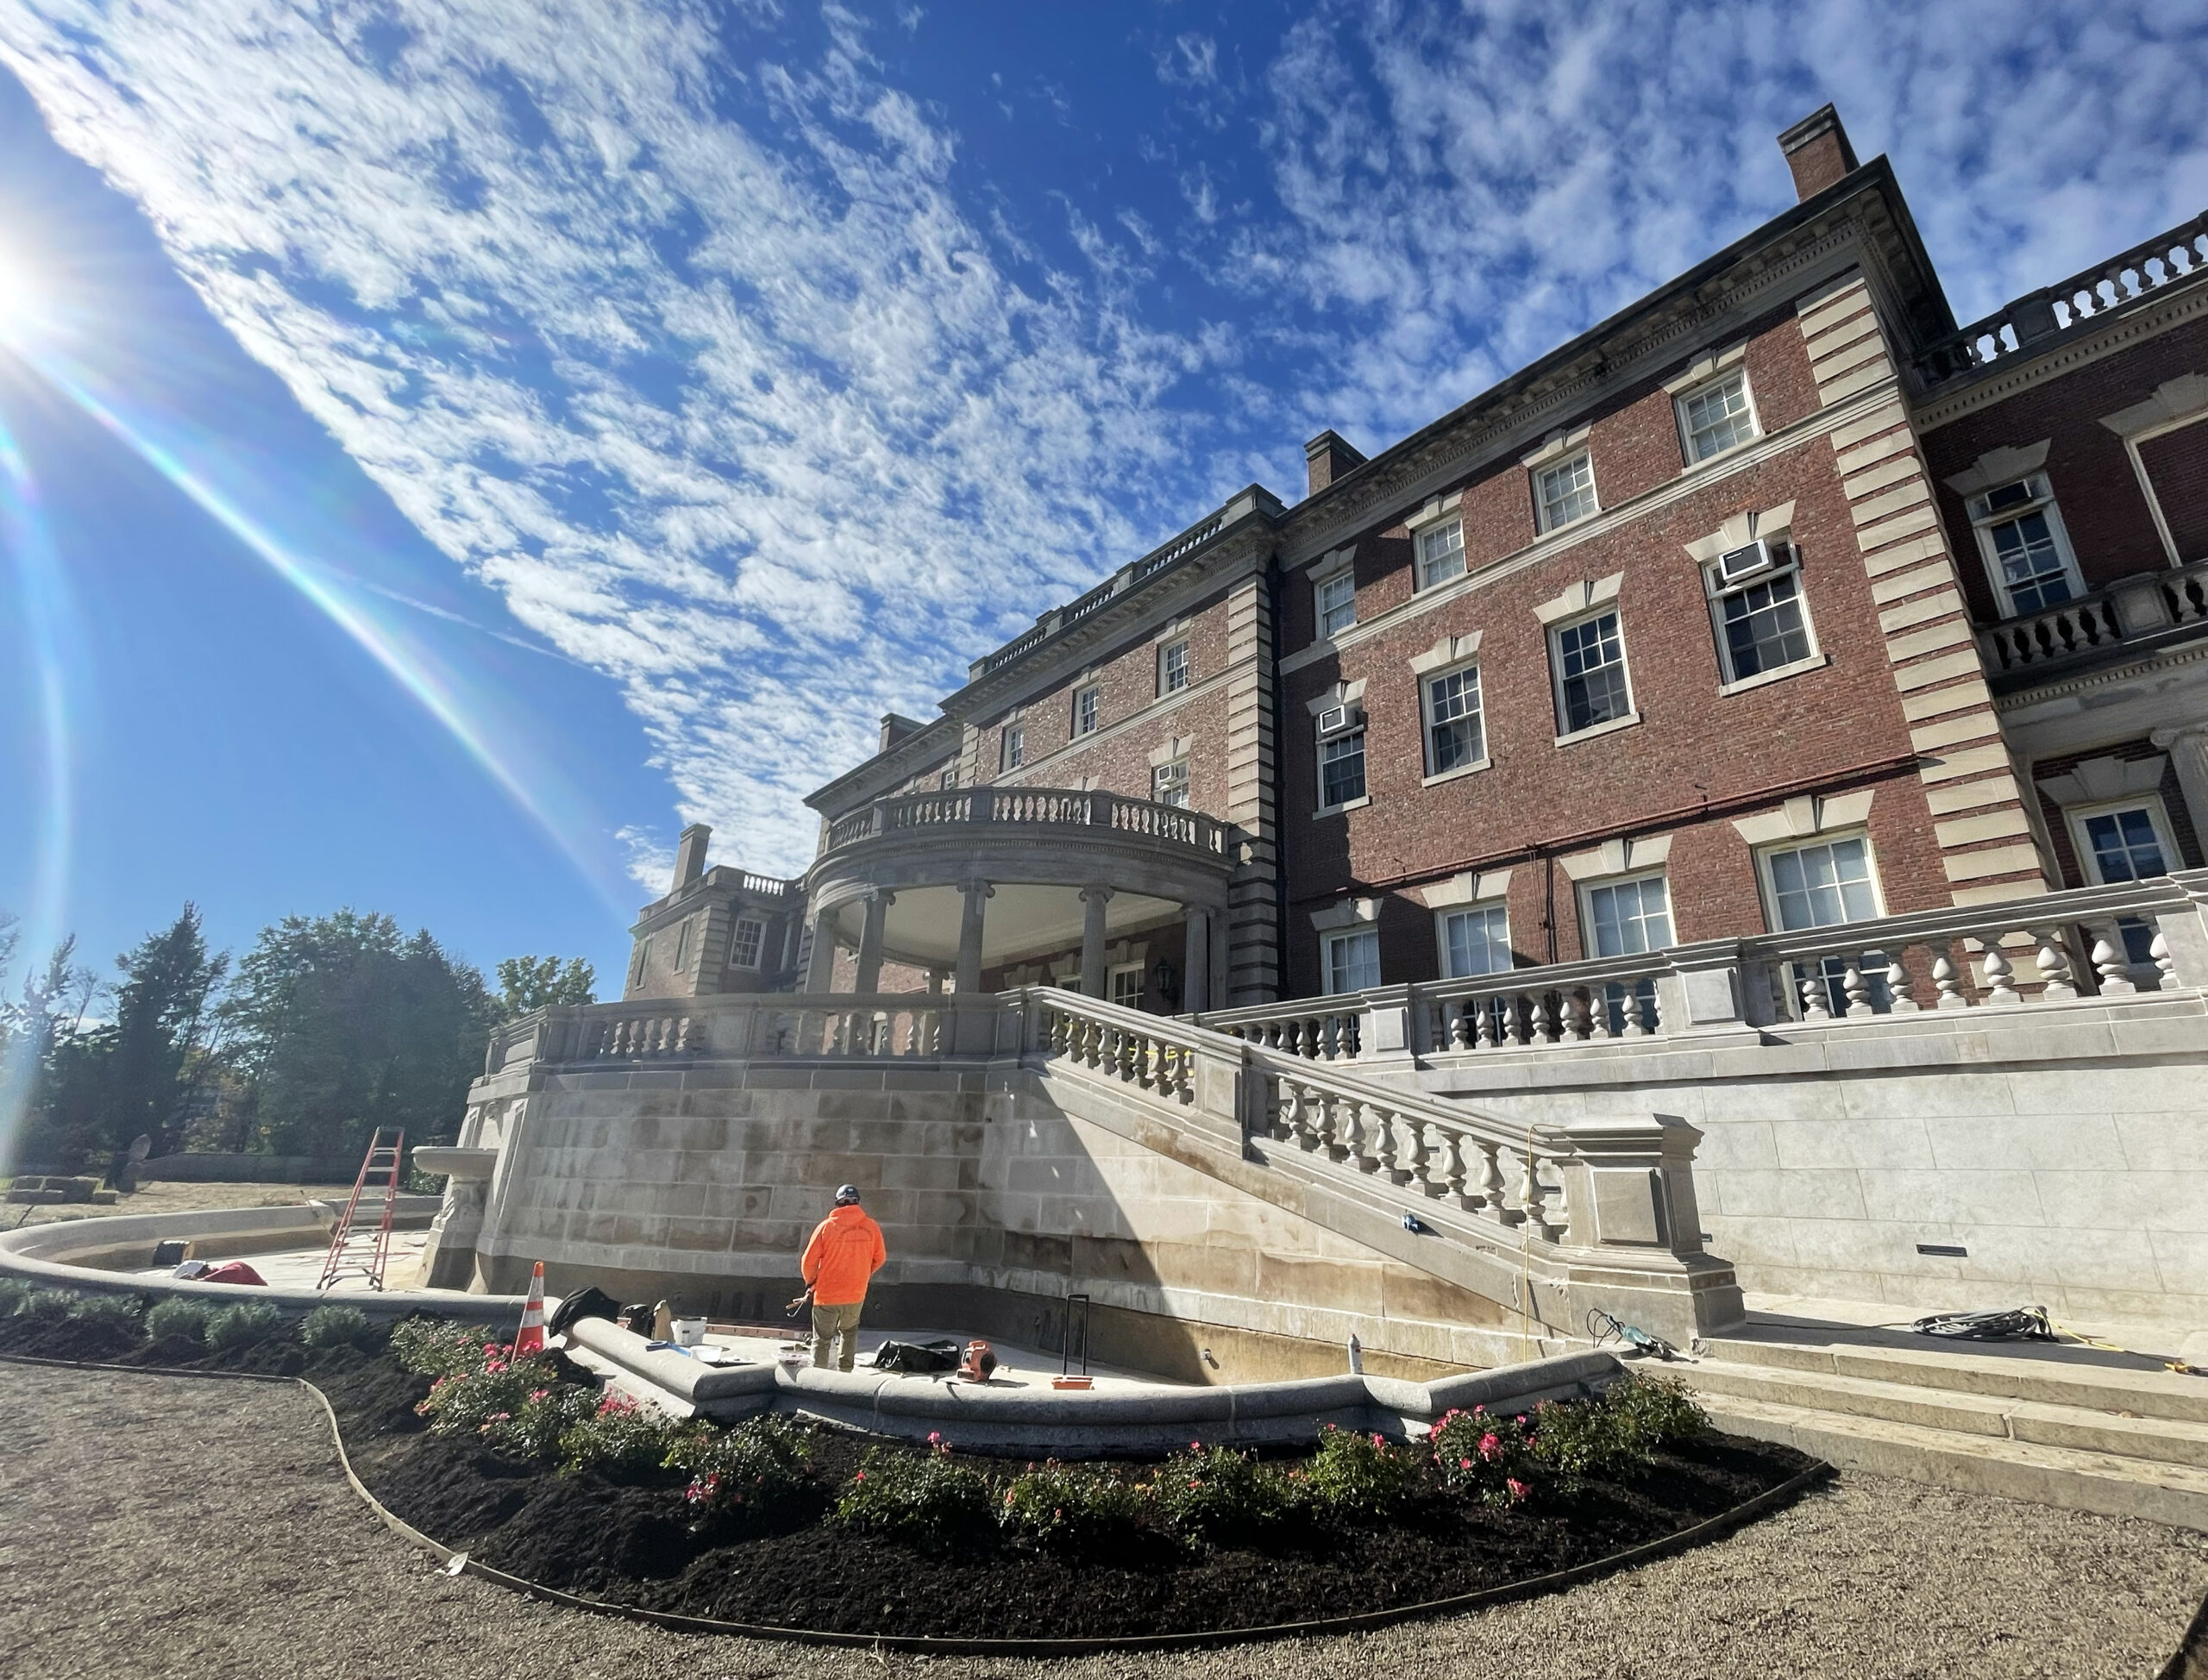 The back of a stately, historic mansion, with a restored terrace and portico, fountain and new landscaping. A man in construction gear surveys the scene.